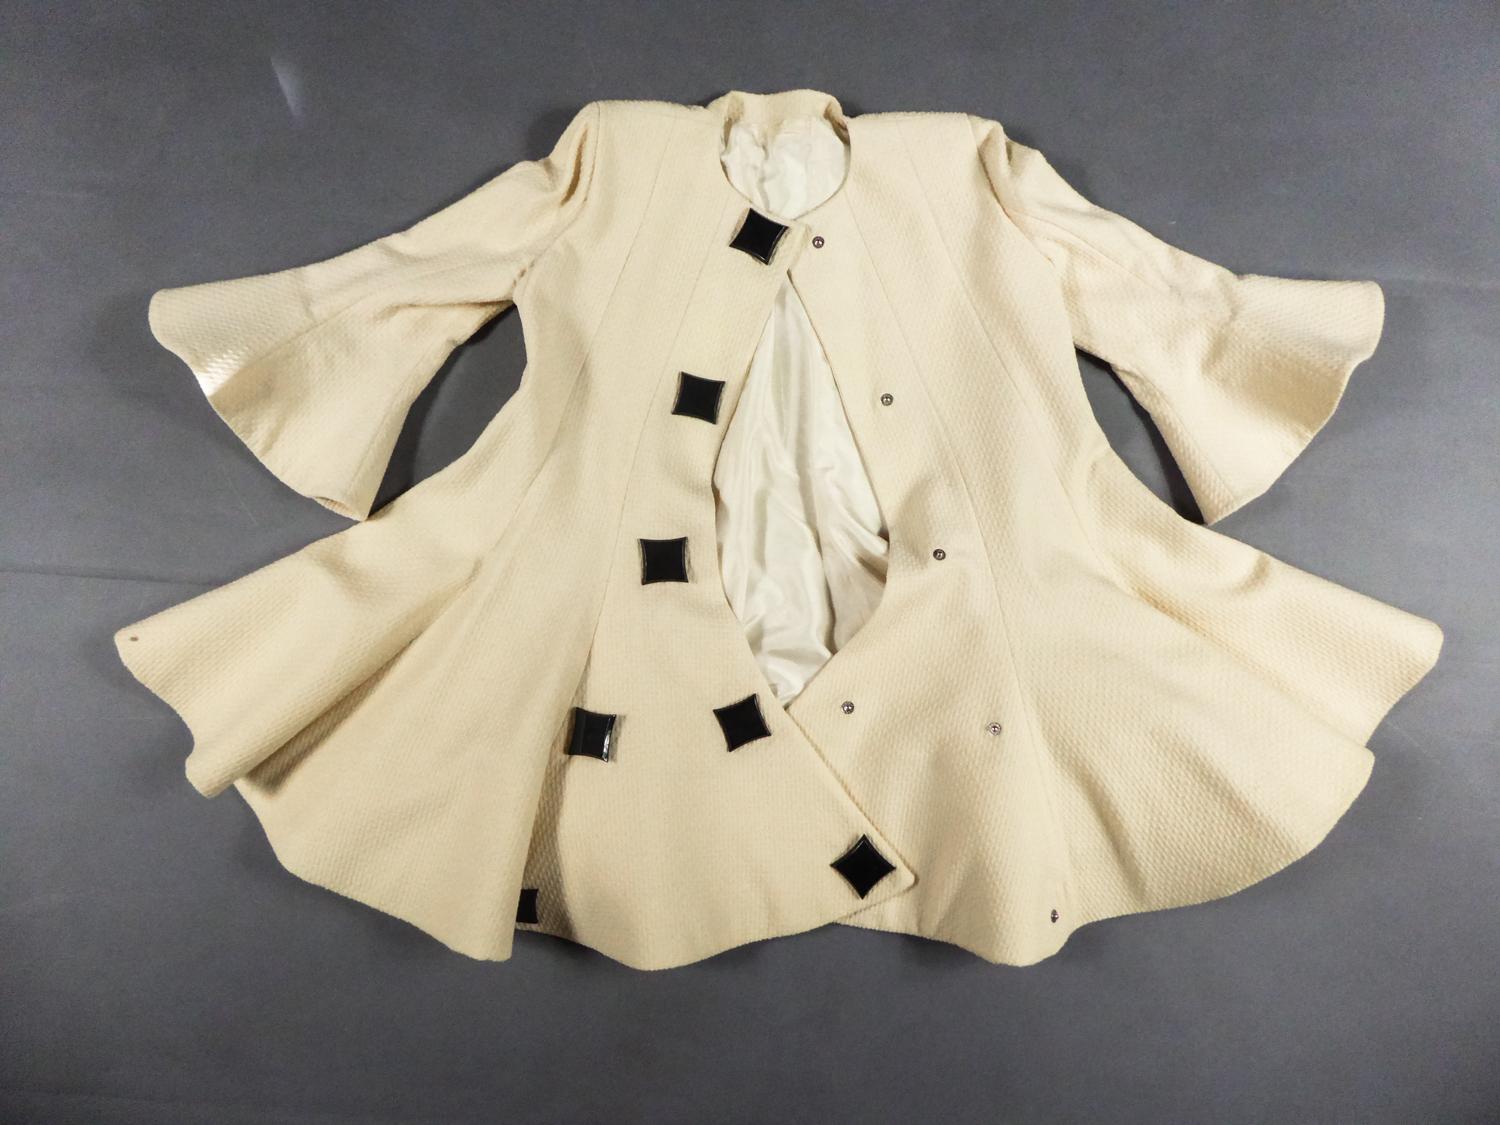 Circa 1990
France

Astonishing mid-length coat in embossed fashioned cream wool inspired by a skater cut by Pierre Cardin Haute Couture and dating from the 1990s. Cut with flared sleeves and bottom of the coat in corolla, stiffened by a tab in the